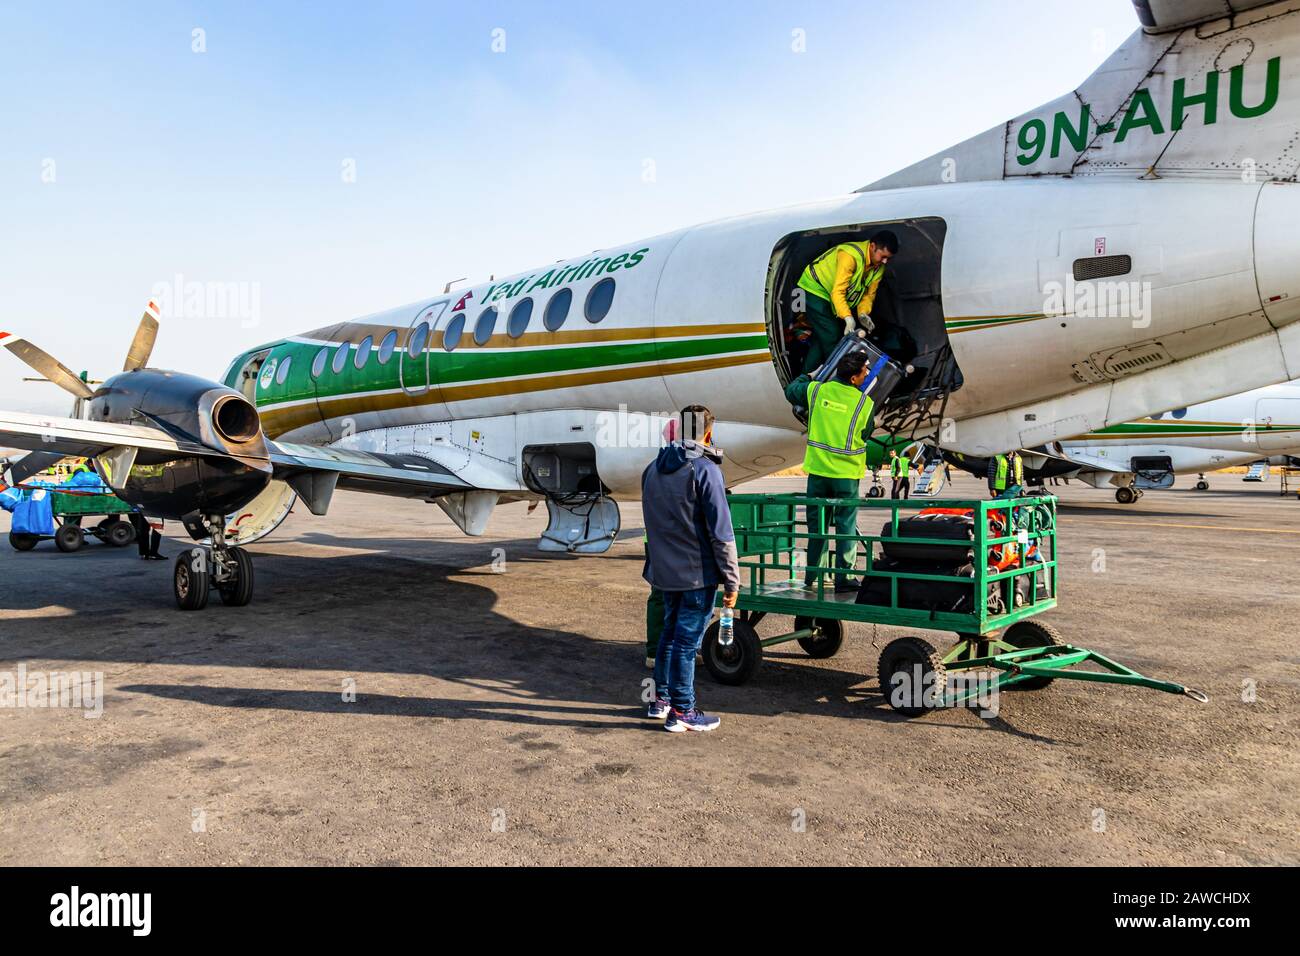 Tribhuvan International Airport, Kathmandu, Nepal, Asia - December 16,2019: Airport staff clears luggage from the plane of Yeti Airlines Stock Photo